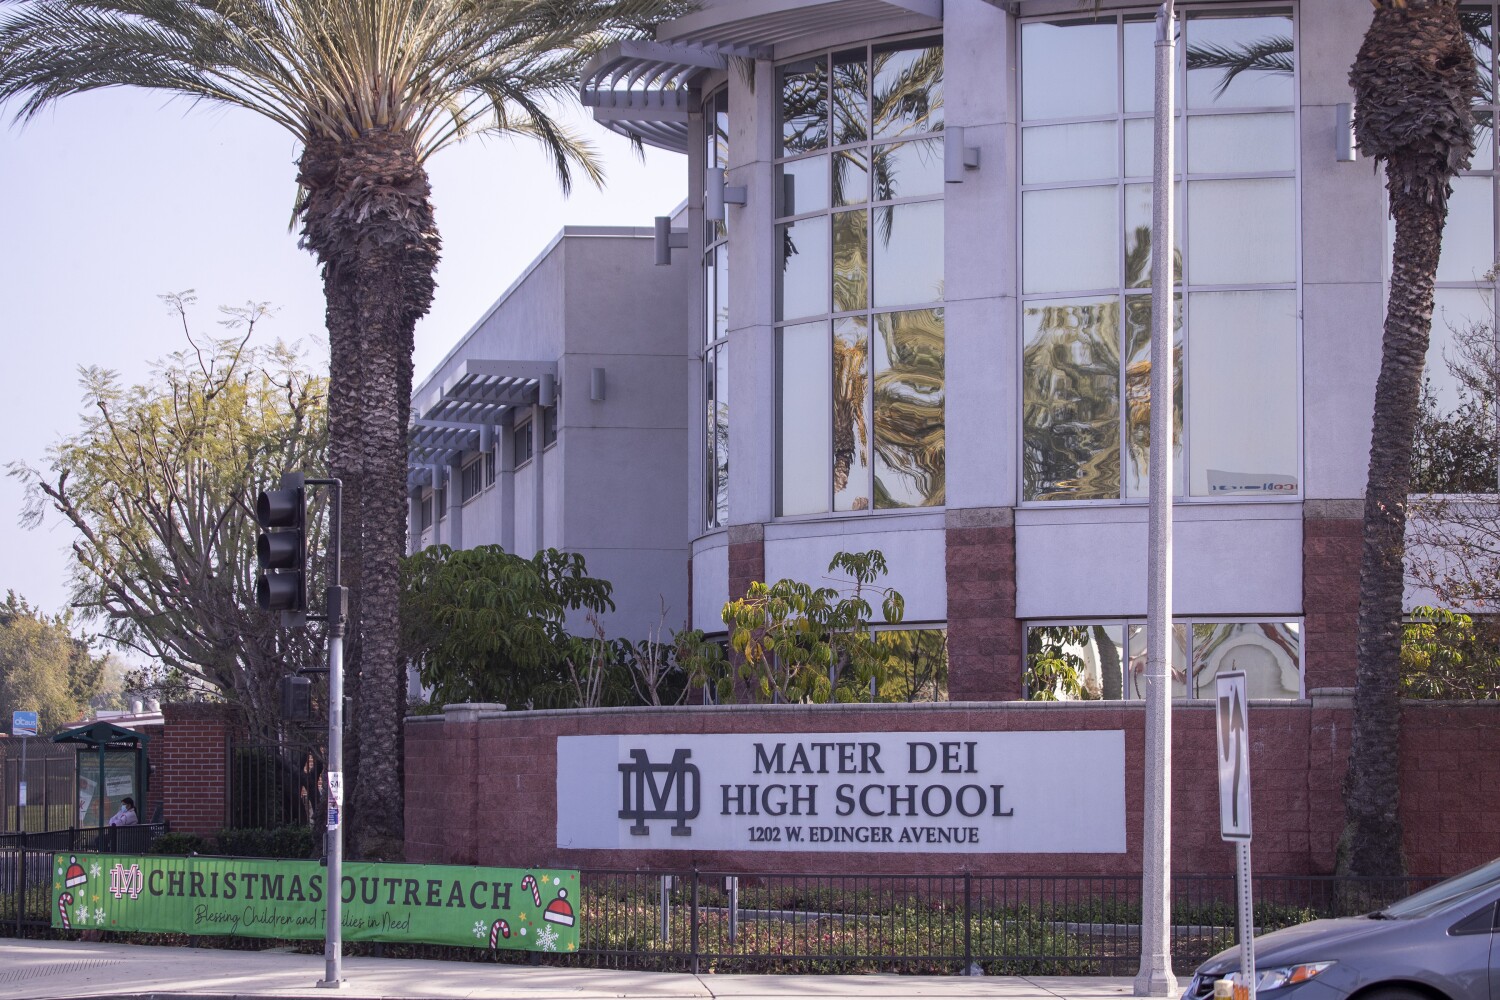 Mater Dei High, closed by threat, to reopen with more security